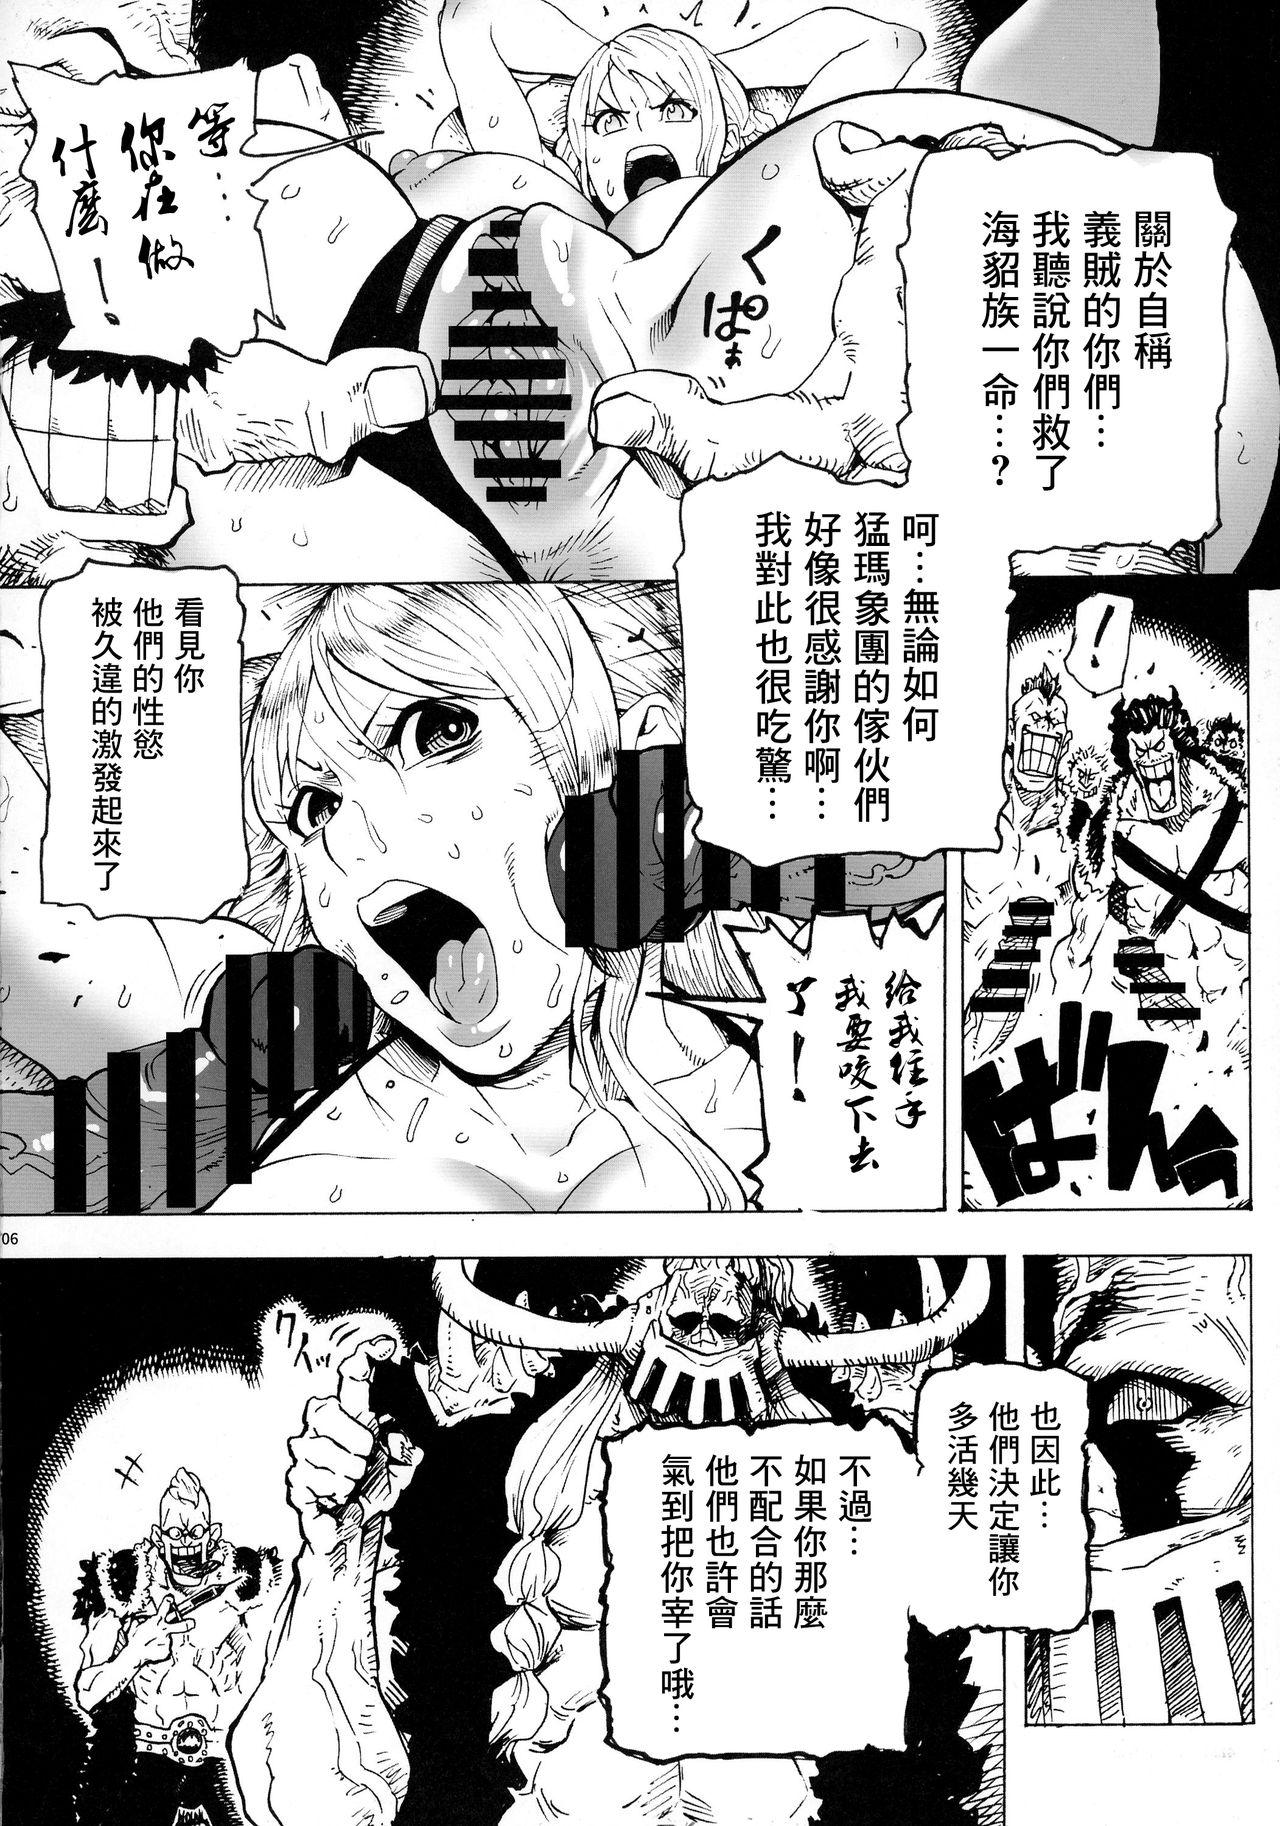 Group P.O.M Another Episode "J.A.C.K" - One piece Calcinha - Page 9